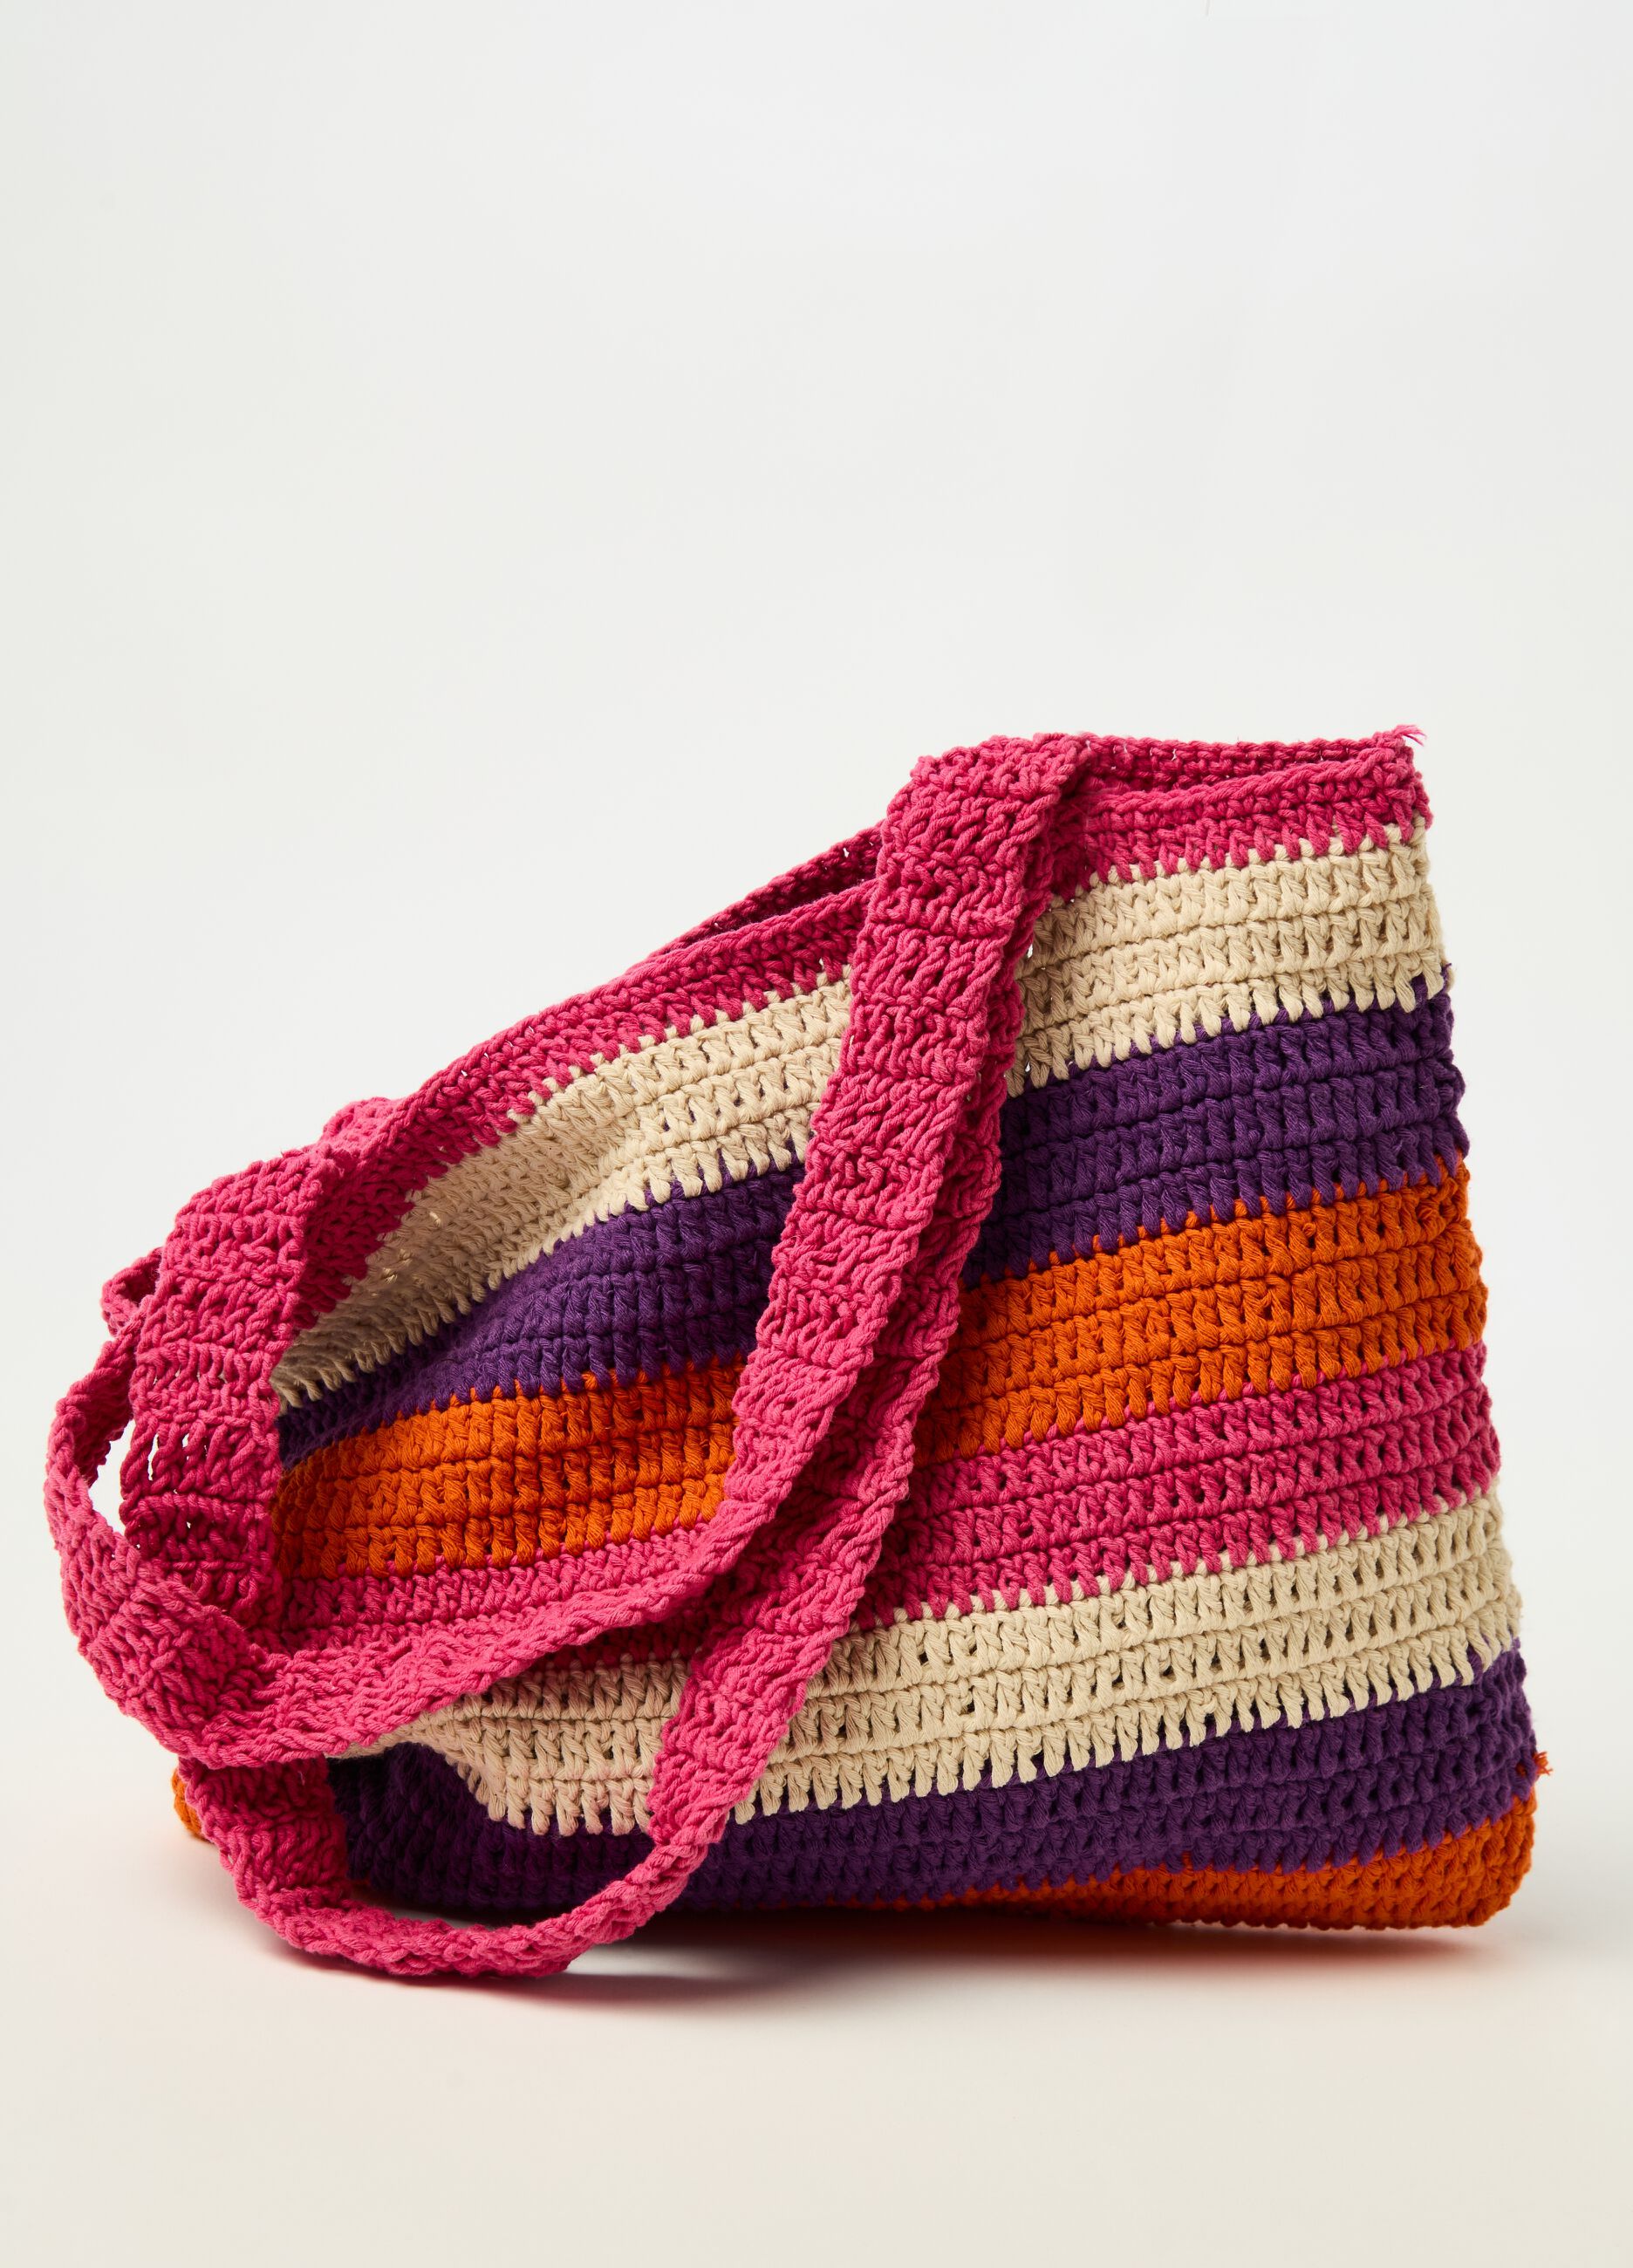 Bag with striped crochet design